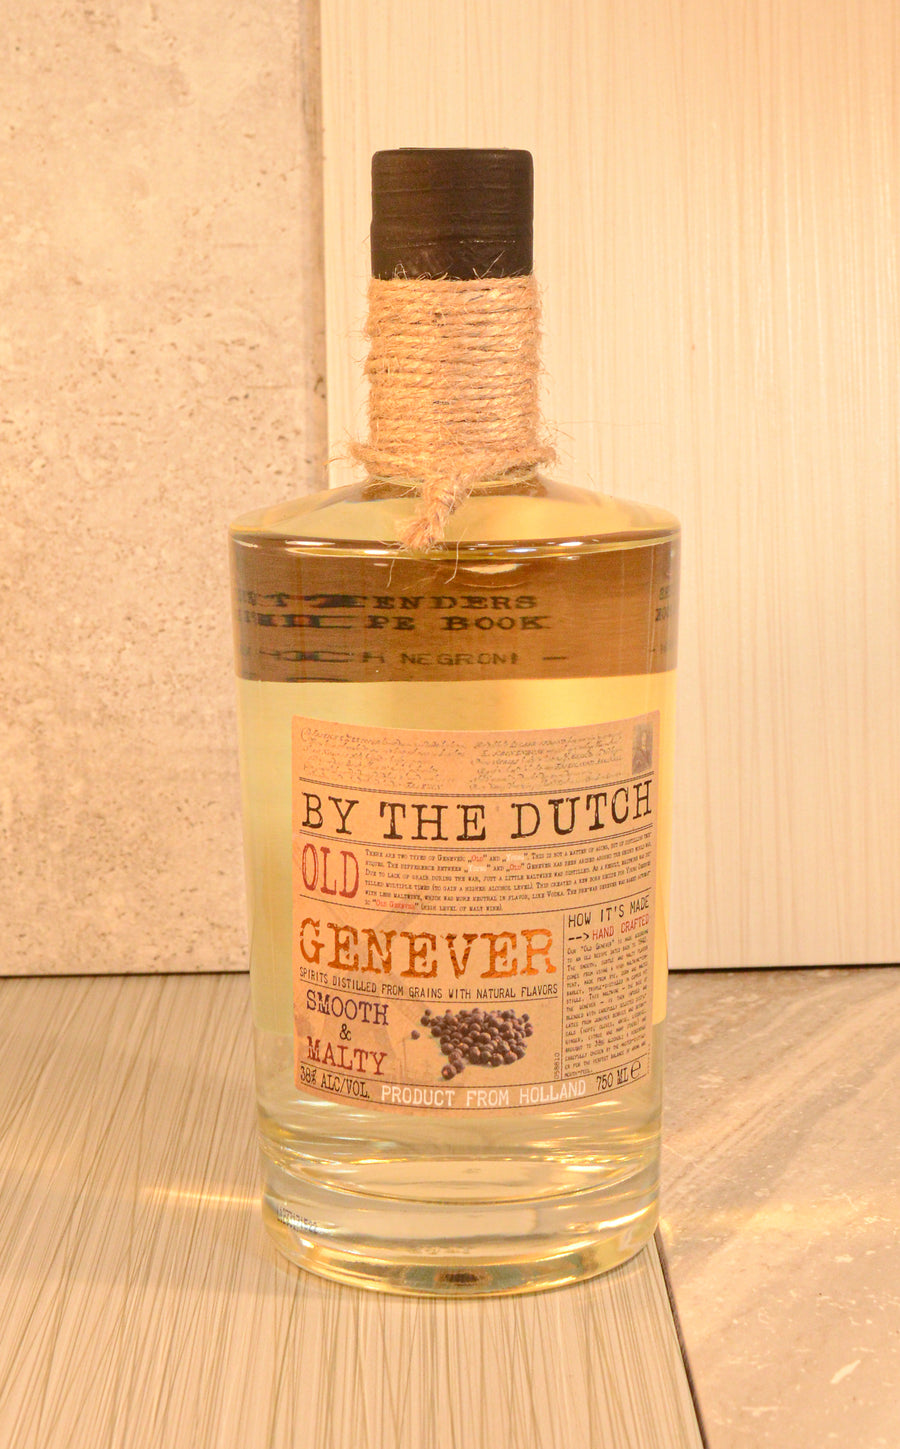 By The Dutch, Old Geneverv